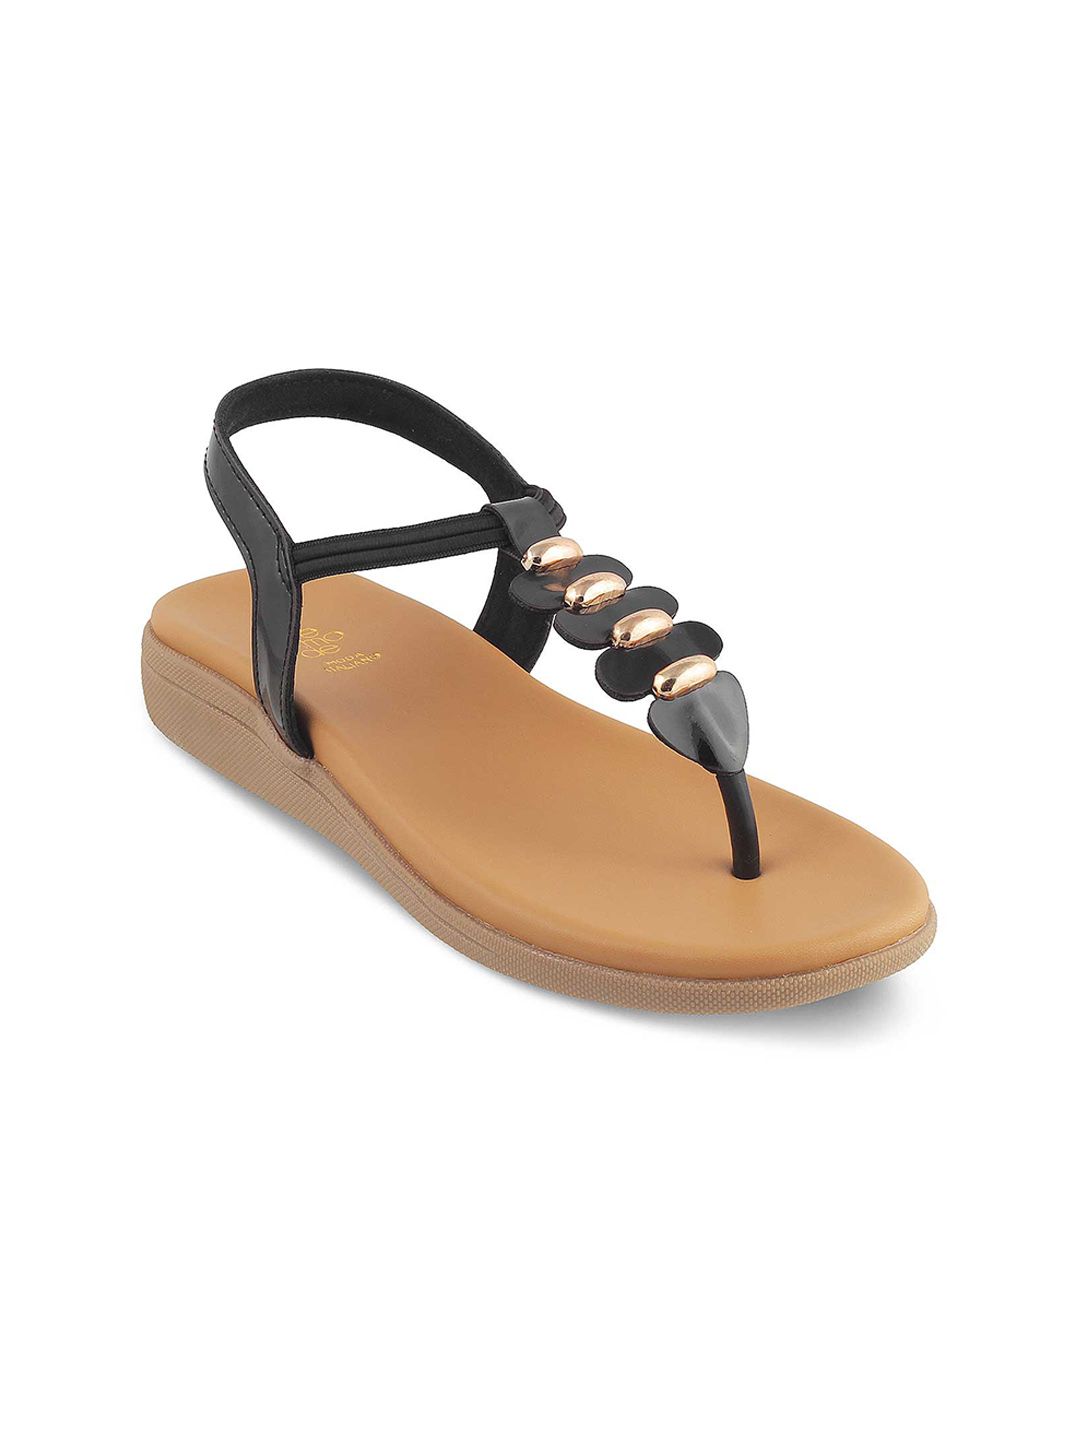 Tresmode Embellished T-Strap Flats With Backstrap Price in India